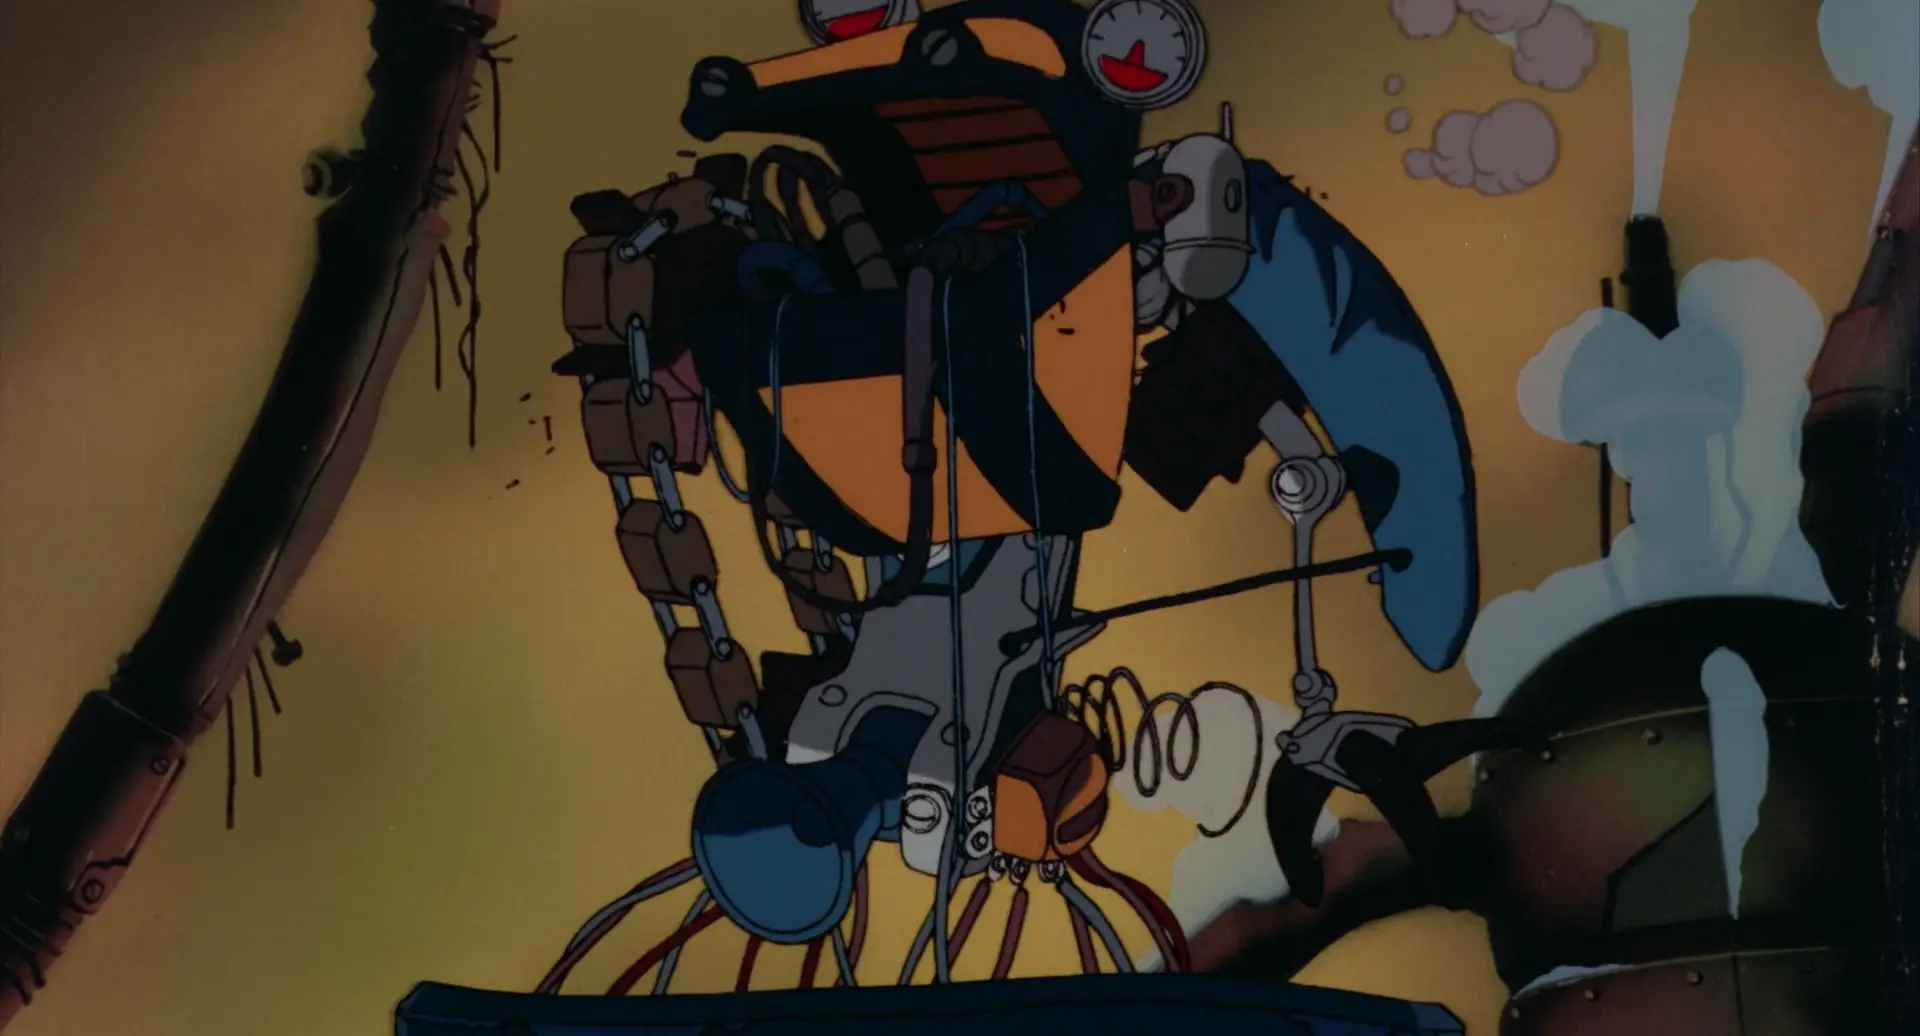 Still from Chicken Man and Red Neck. A robot made of a cacophony of parts including a large excavator bucket, a megaphone, a chain link belt, and various small dials.